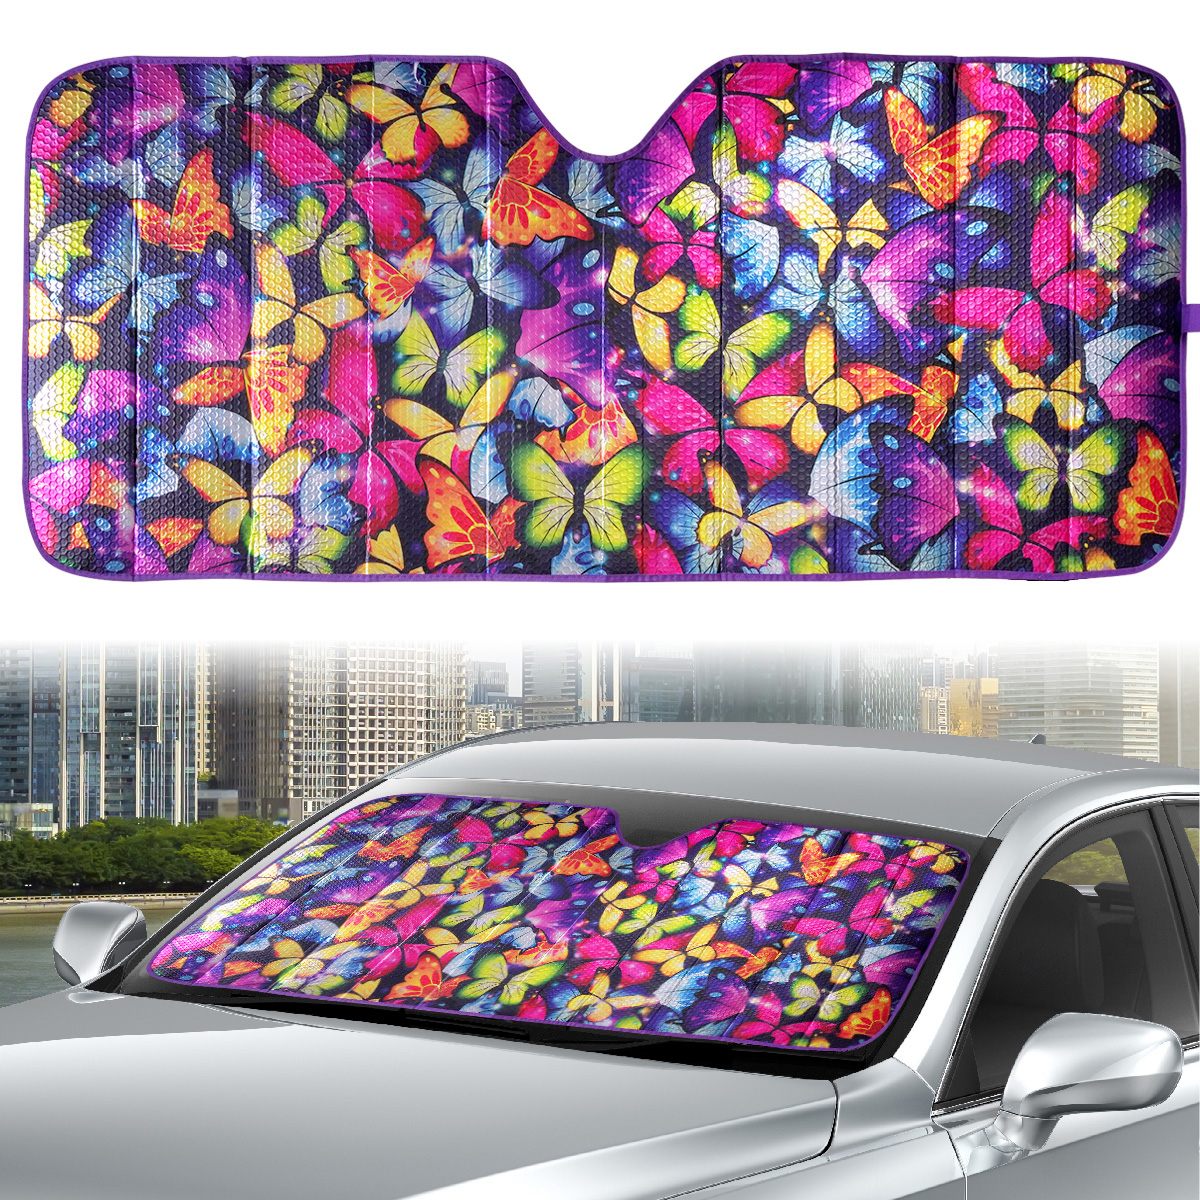 Auto Drive Vehicle's Windshield Fit Butterfly Accordion Sun Shade  AD021703M-2 1 Pack, 63'' x 28.5'' 